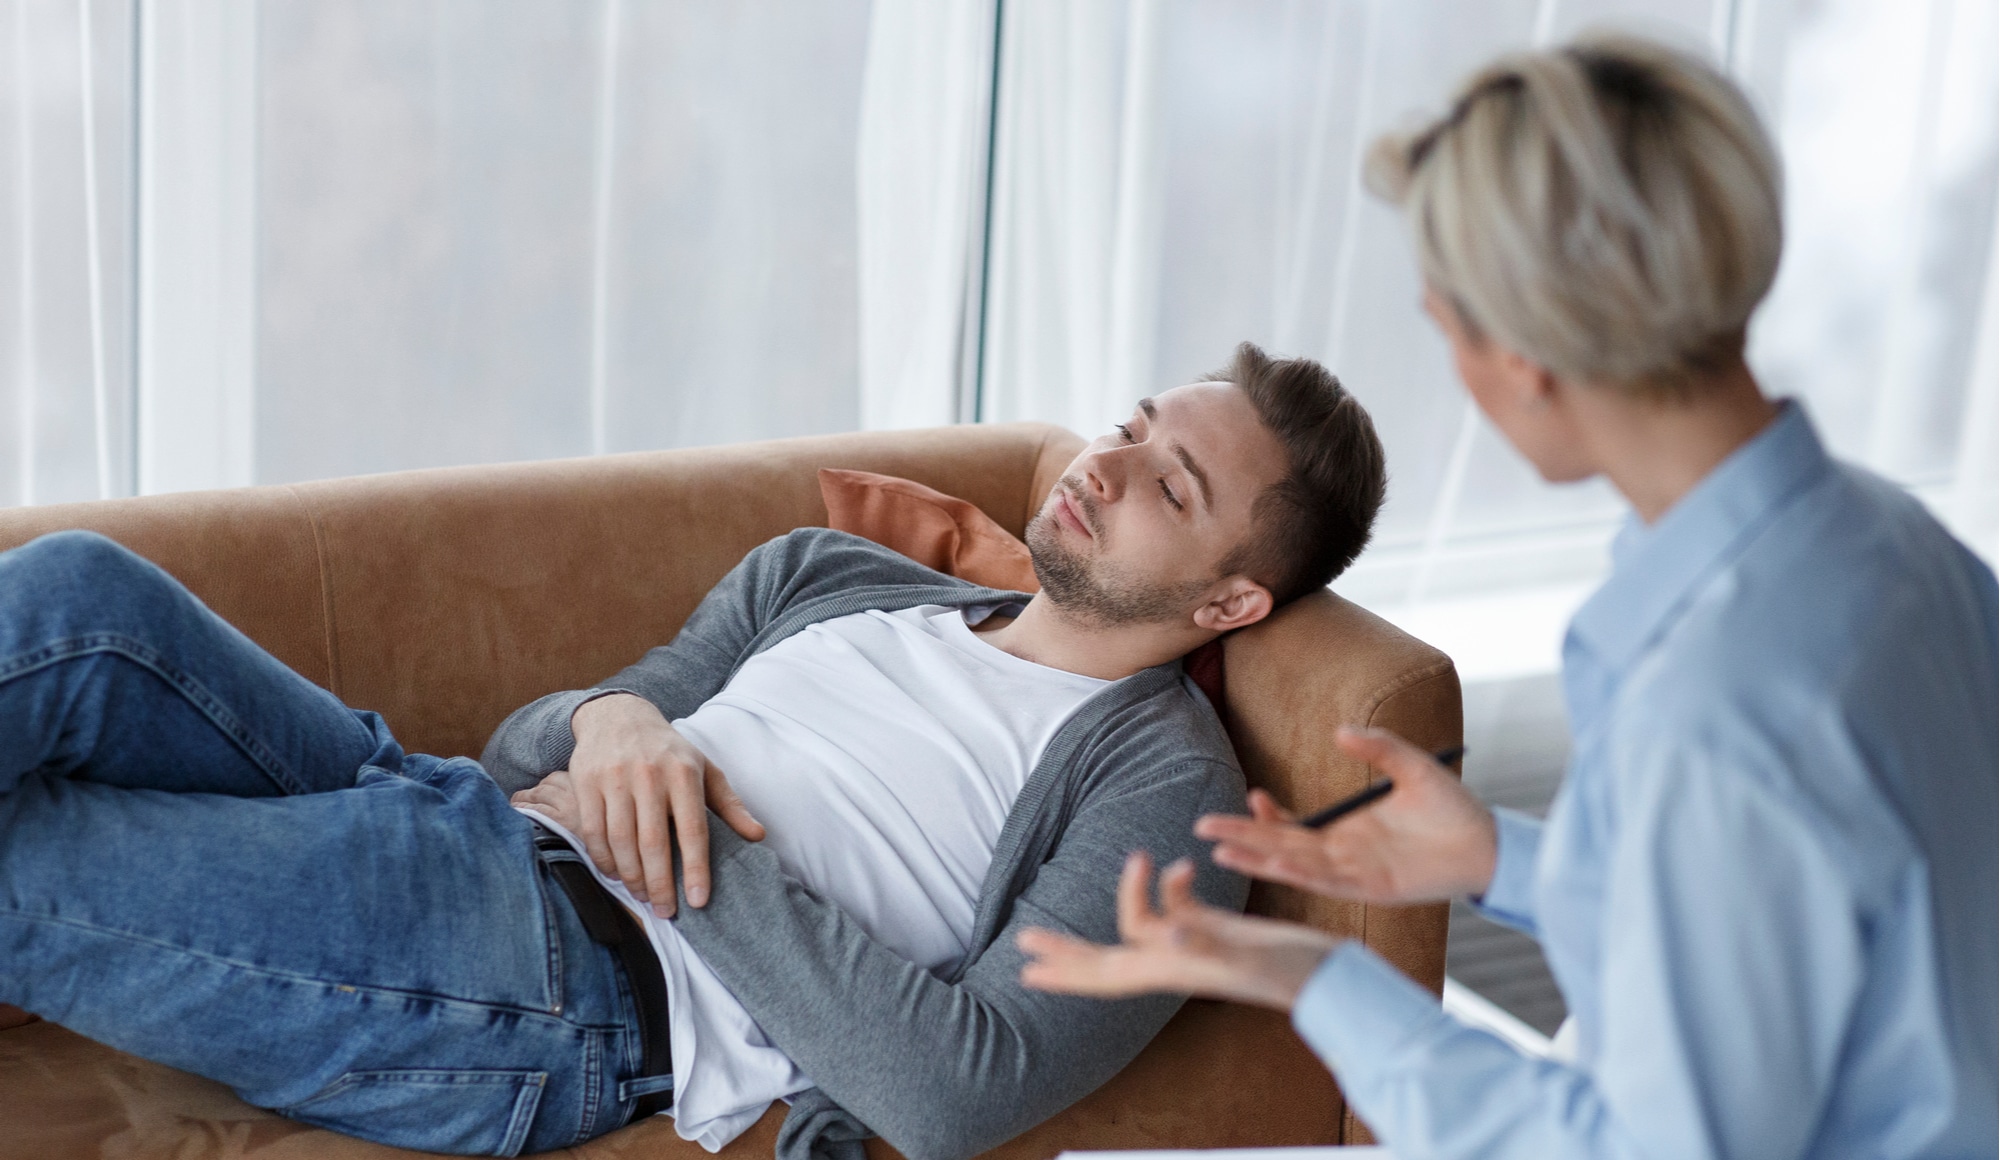 What are Some Common Signs of a Drug Addict? Pathfinders Recovery Center - A young man is sitting with an addiction specialist for an initial consultation to determine if he has the signs of a drug addict and if he requires treatment.